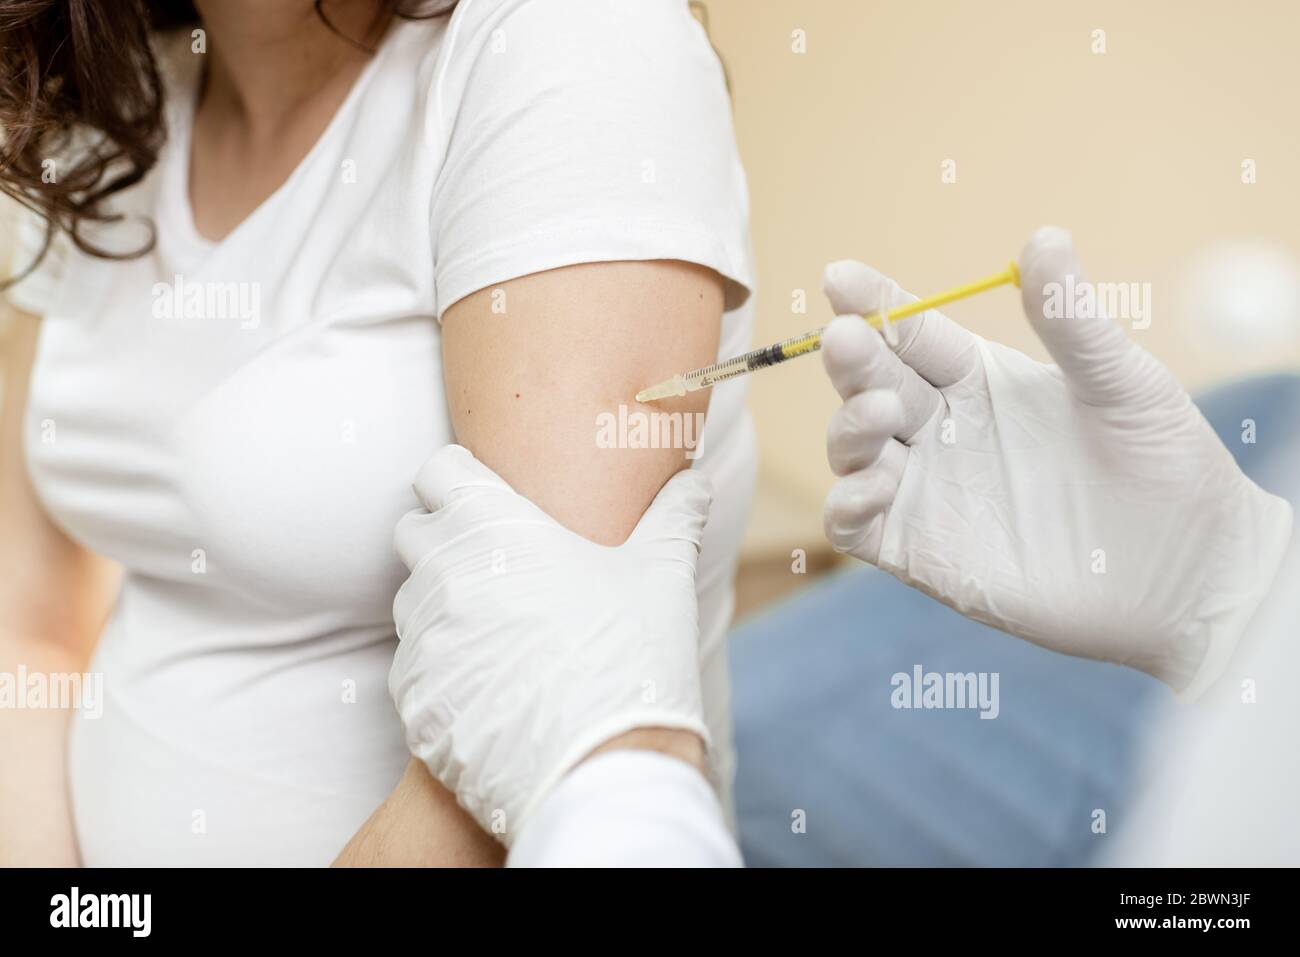 Vaccine injection procedure for a pregnant woman, cropped view without face Stock Photo